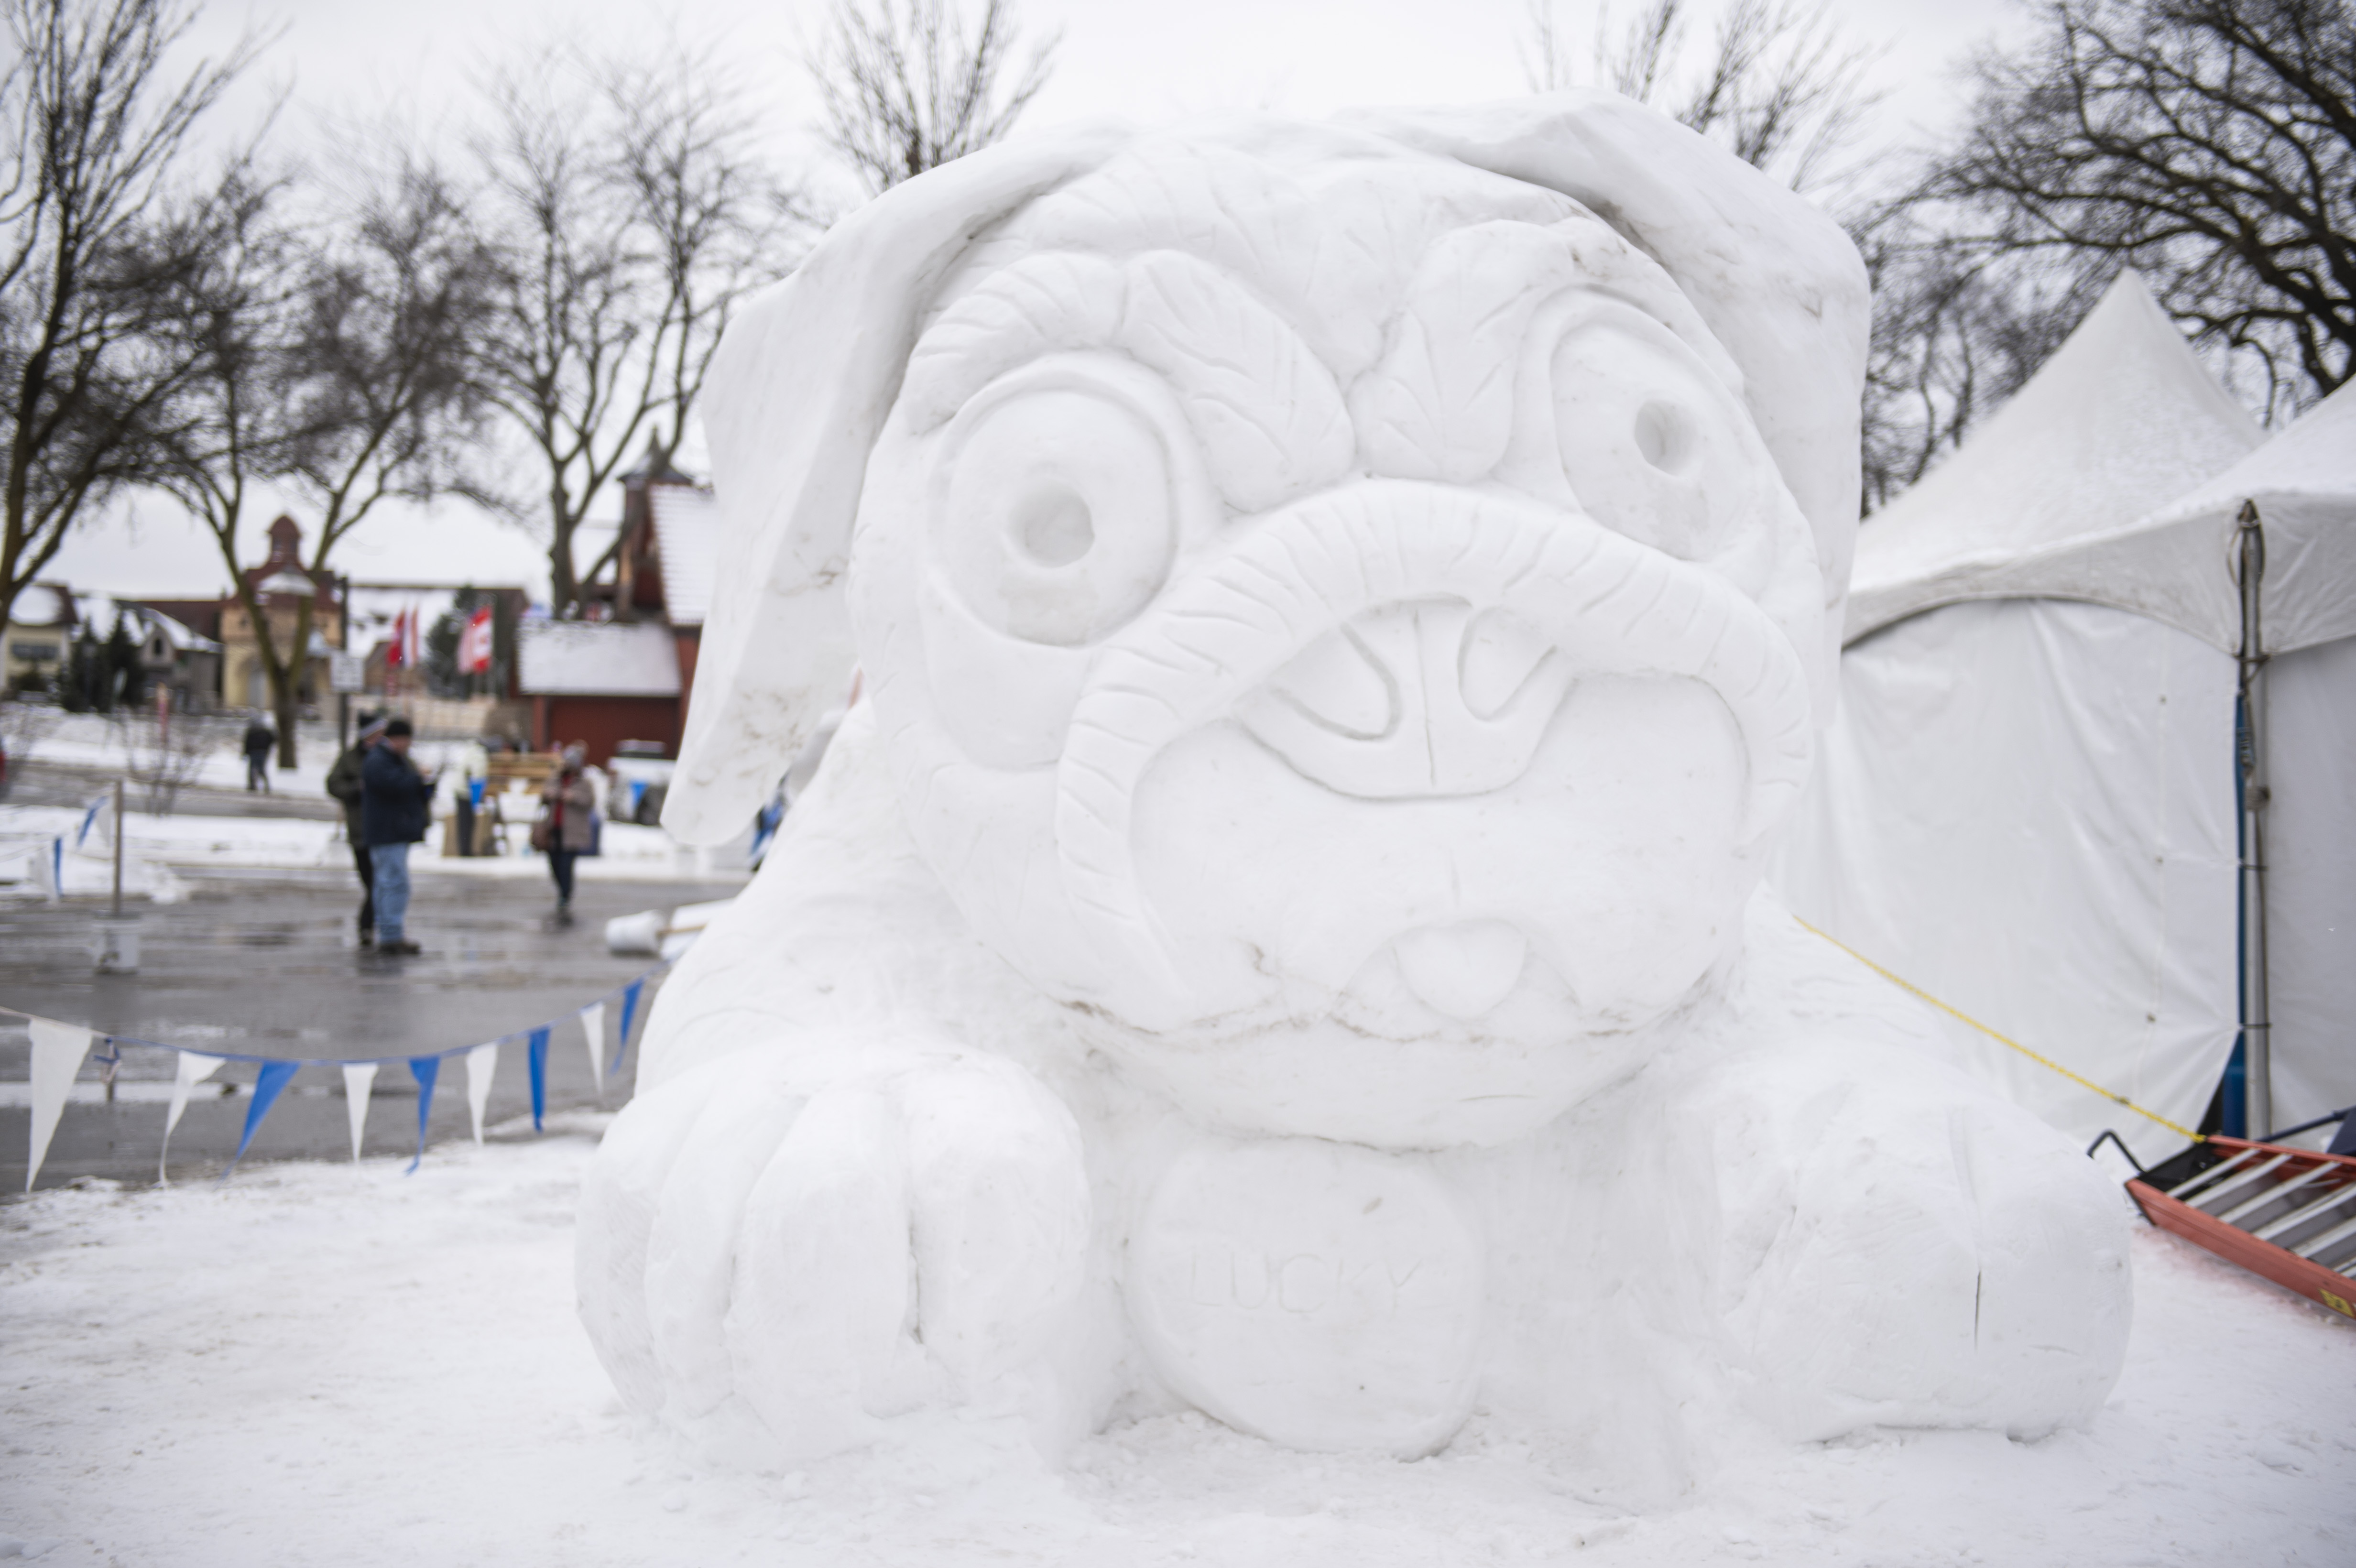 Frankenmuth Calendar Of Events 2022 Zehnder's Snowfest 2022 Begins Today. Here's The Schedule Of Events -  Mlive.com